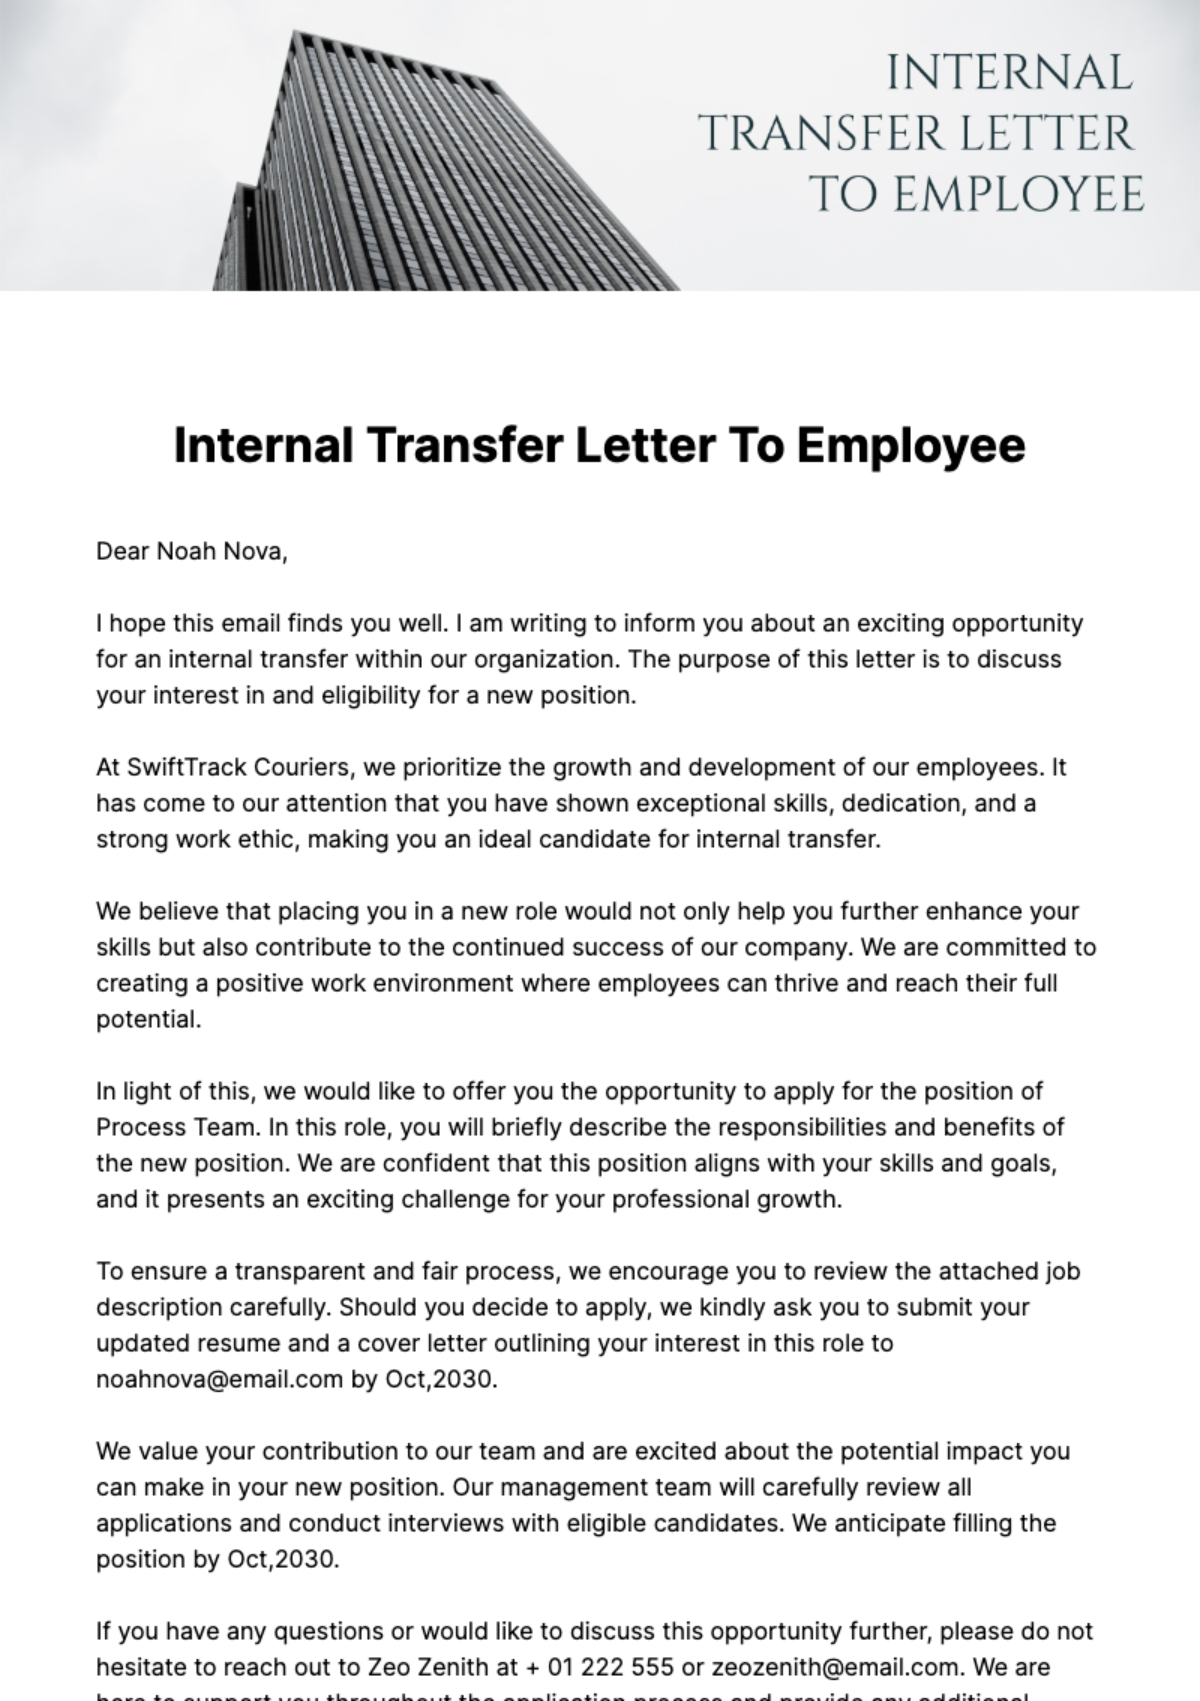 Internal Transfer Letter To Employee Template